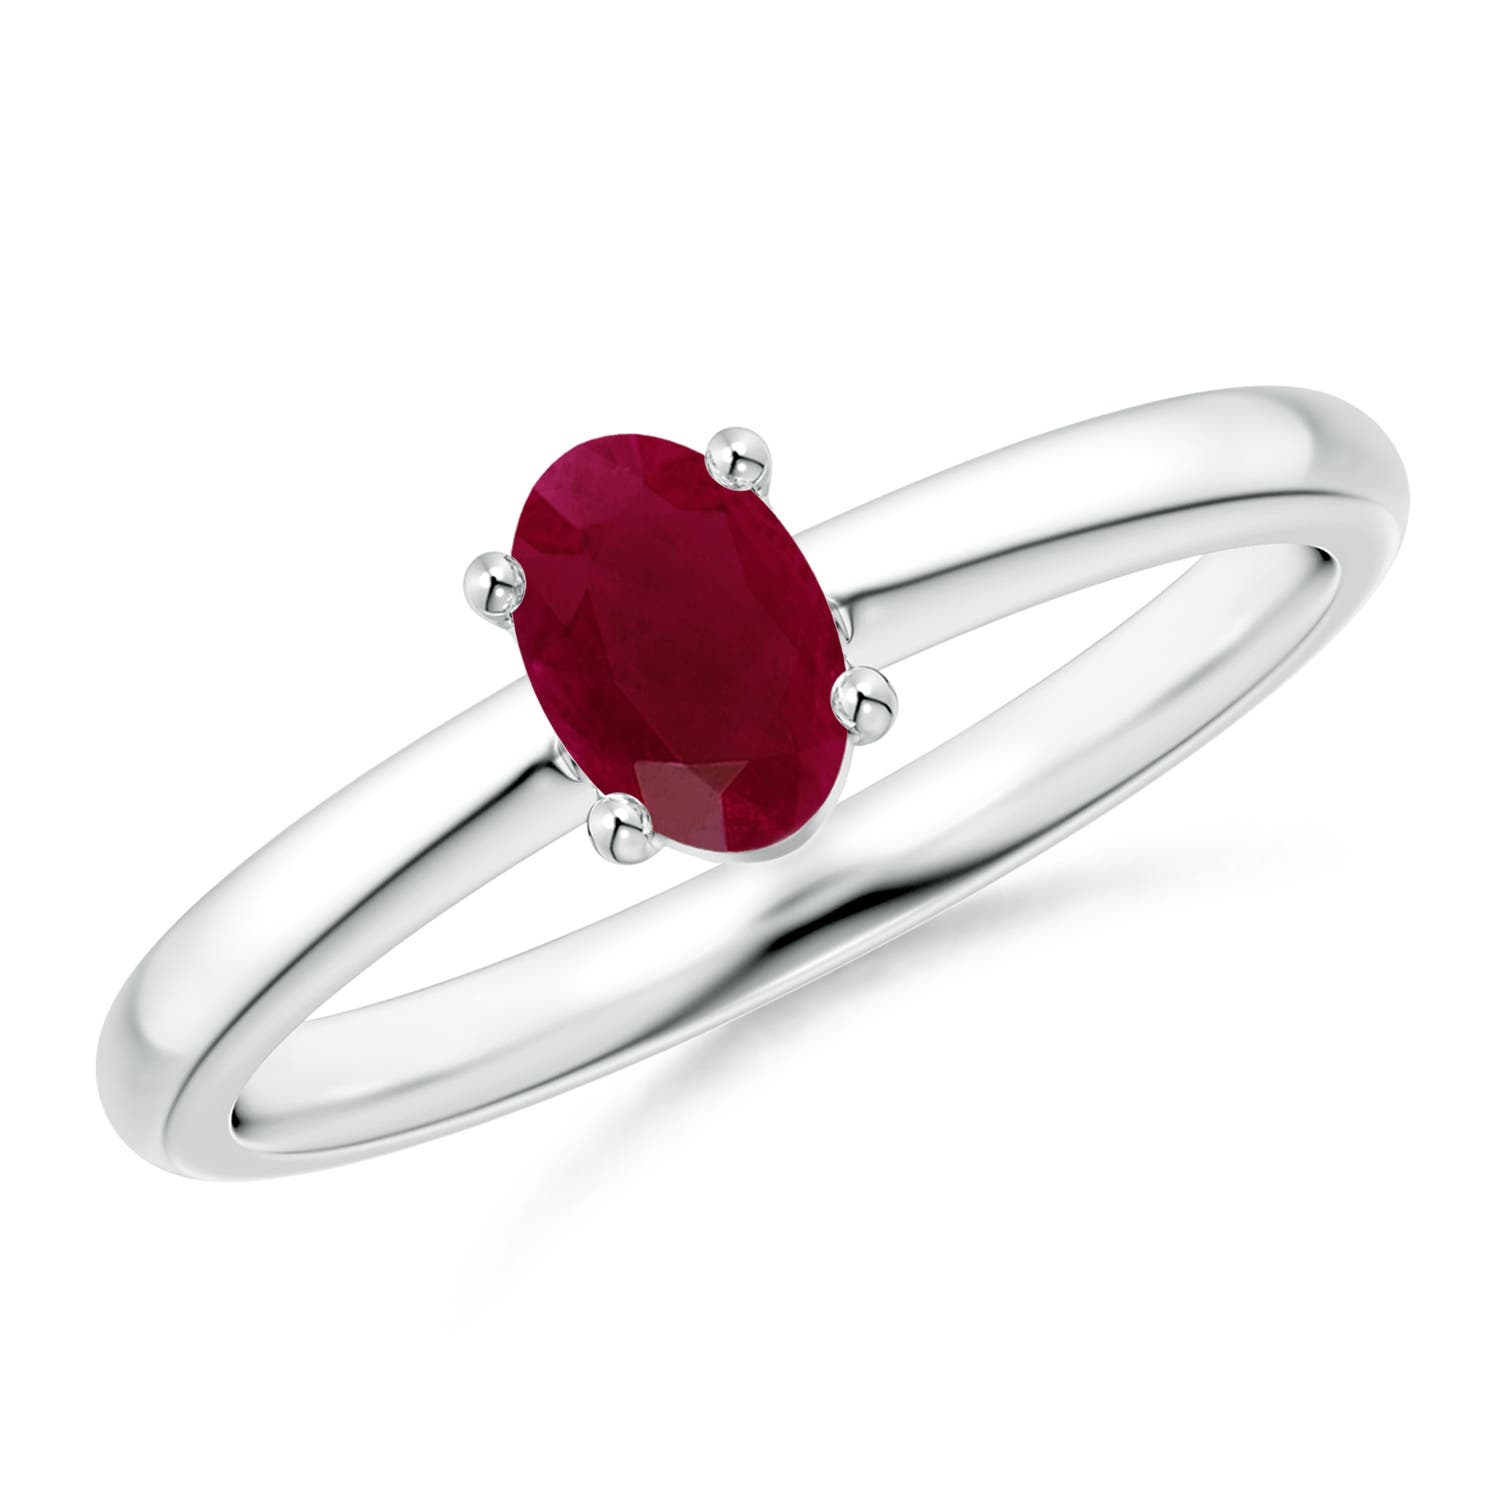 A - Ruby / 0.6 CT / 14 KT White Gold